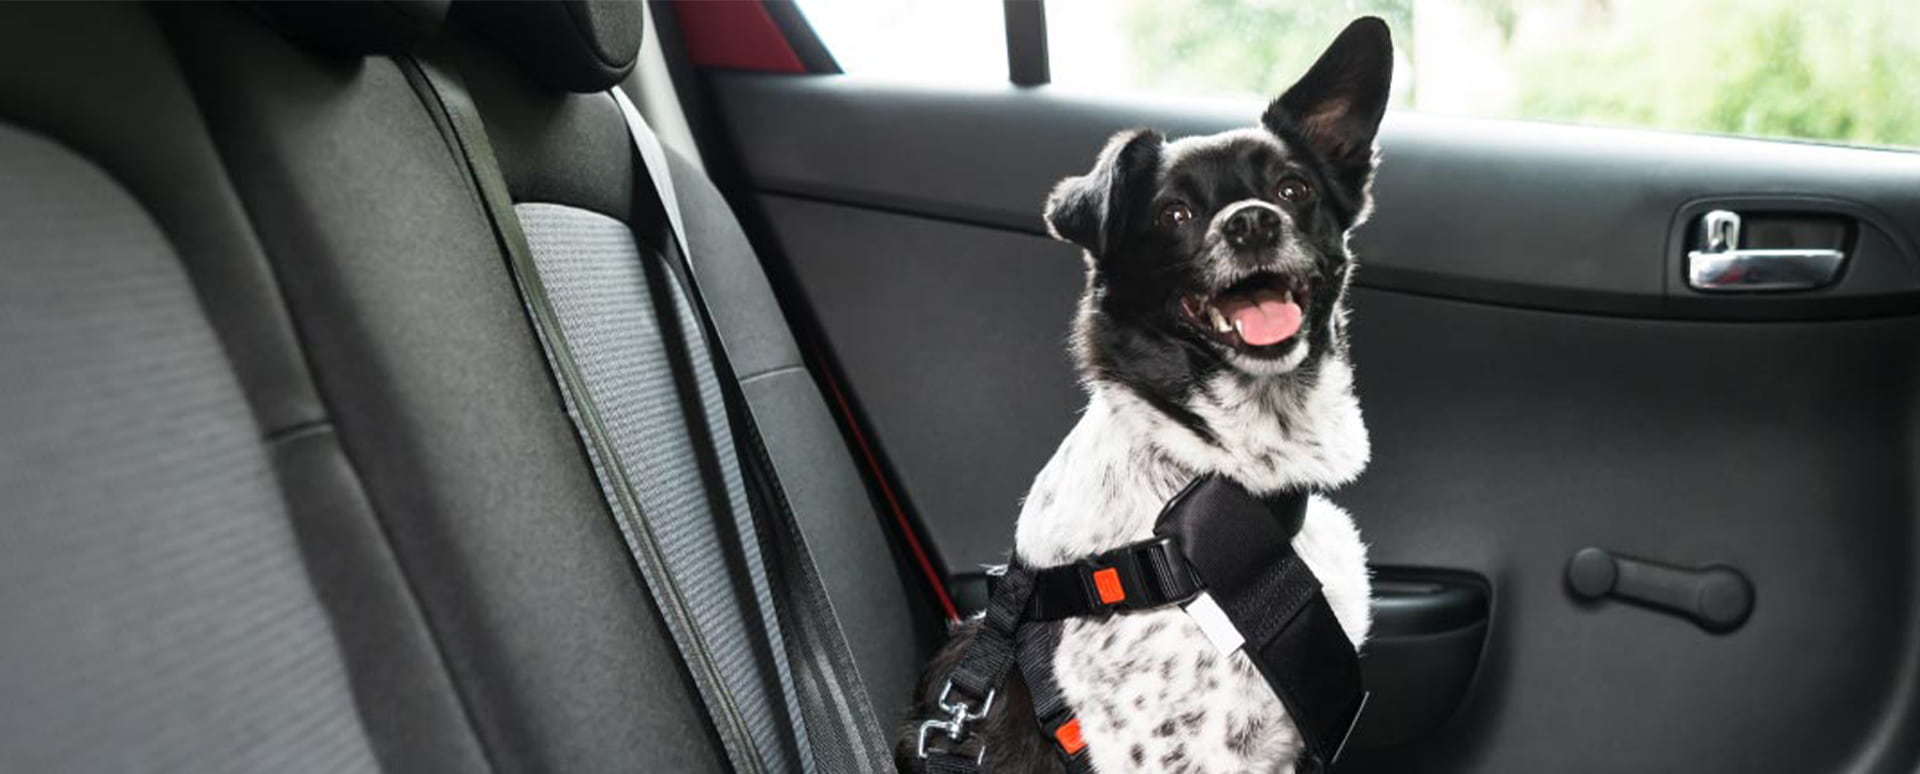 White and black dog sitting in the backseat of a car